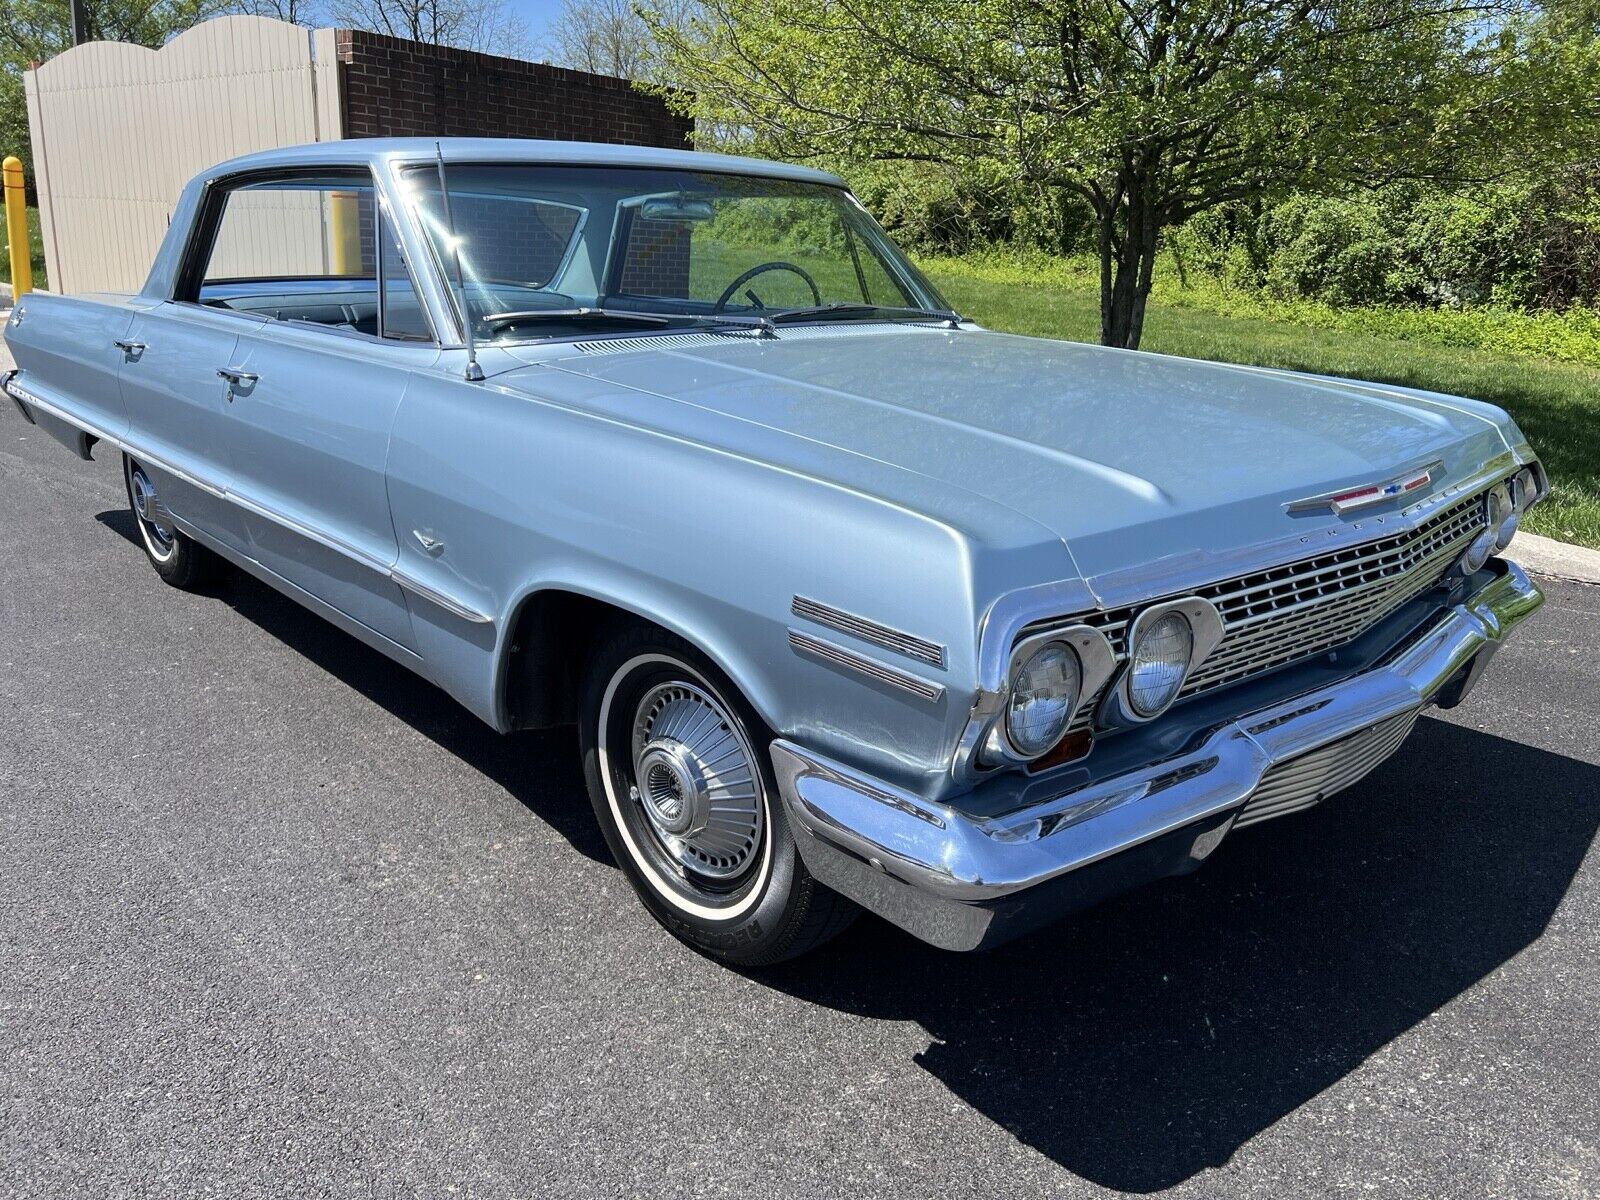 99.99% Original: 1963 Chevrolet Impala Just Went on a 250-Mile Trip With No Problems